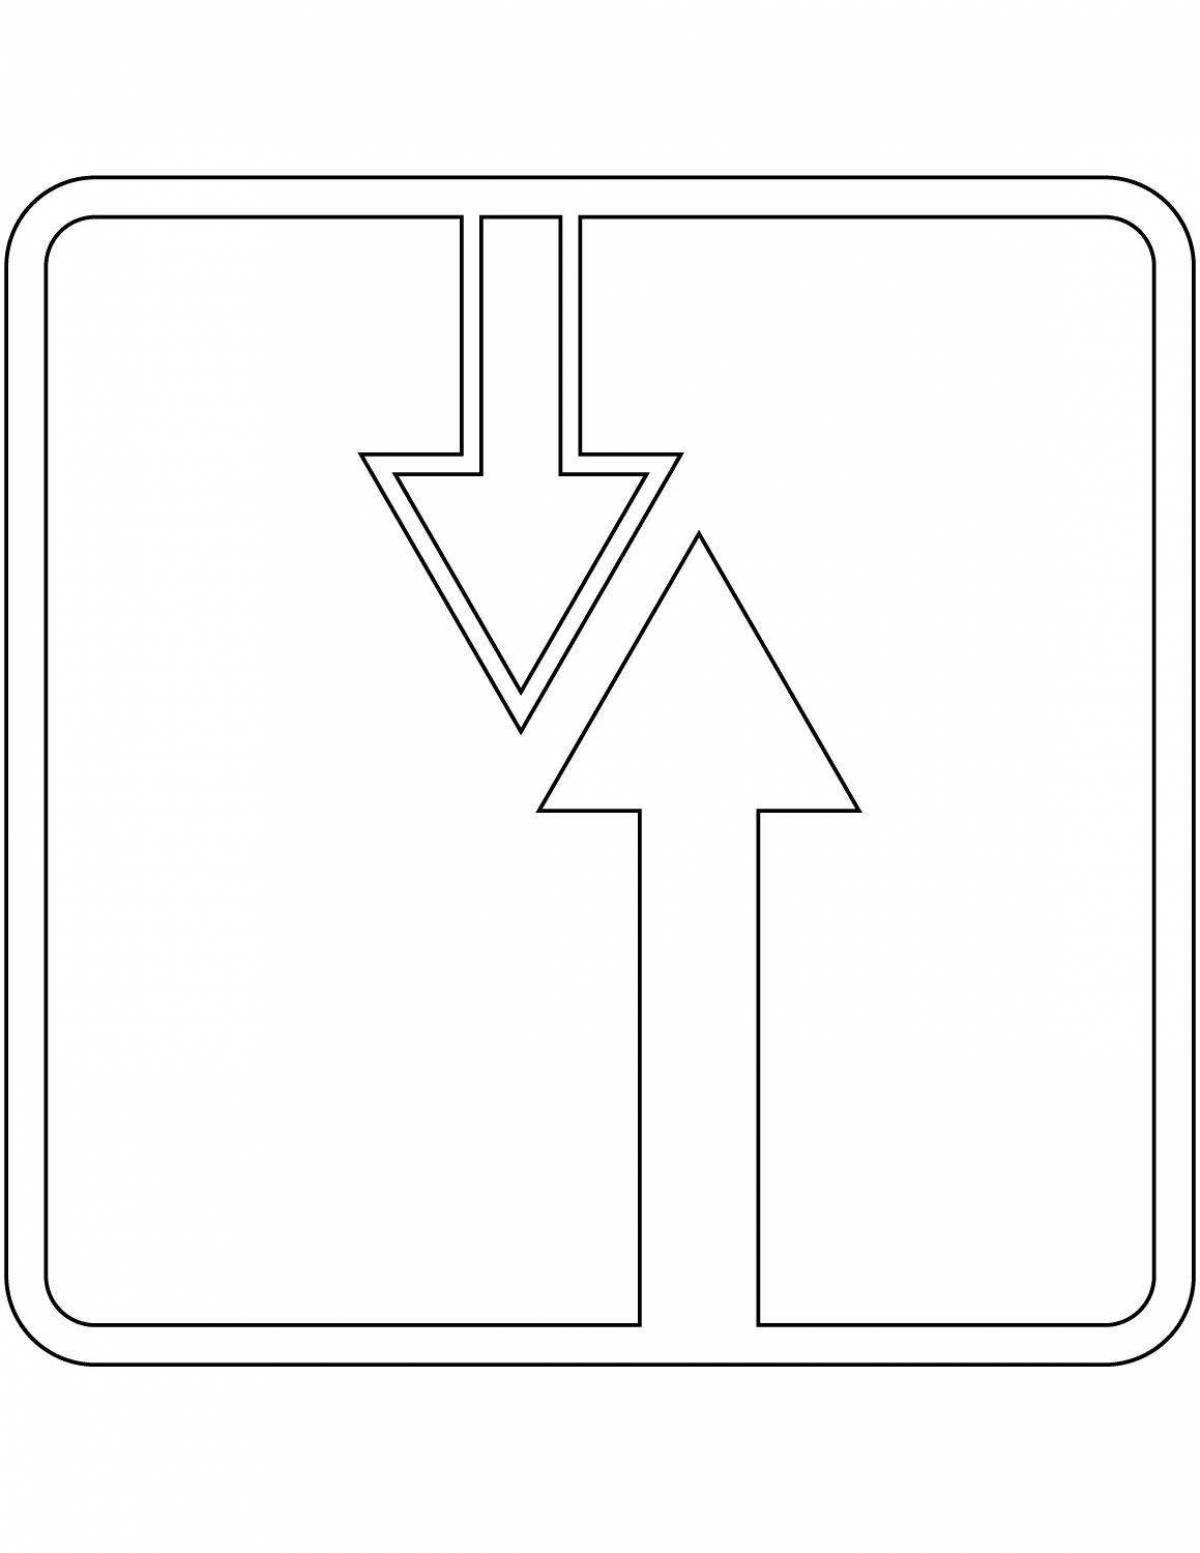 Glowing give way sign coloring page